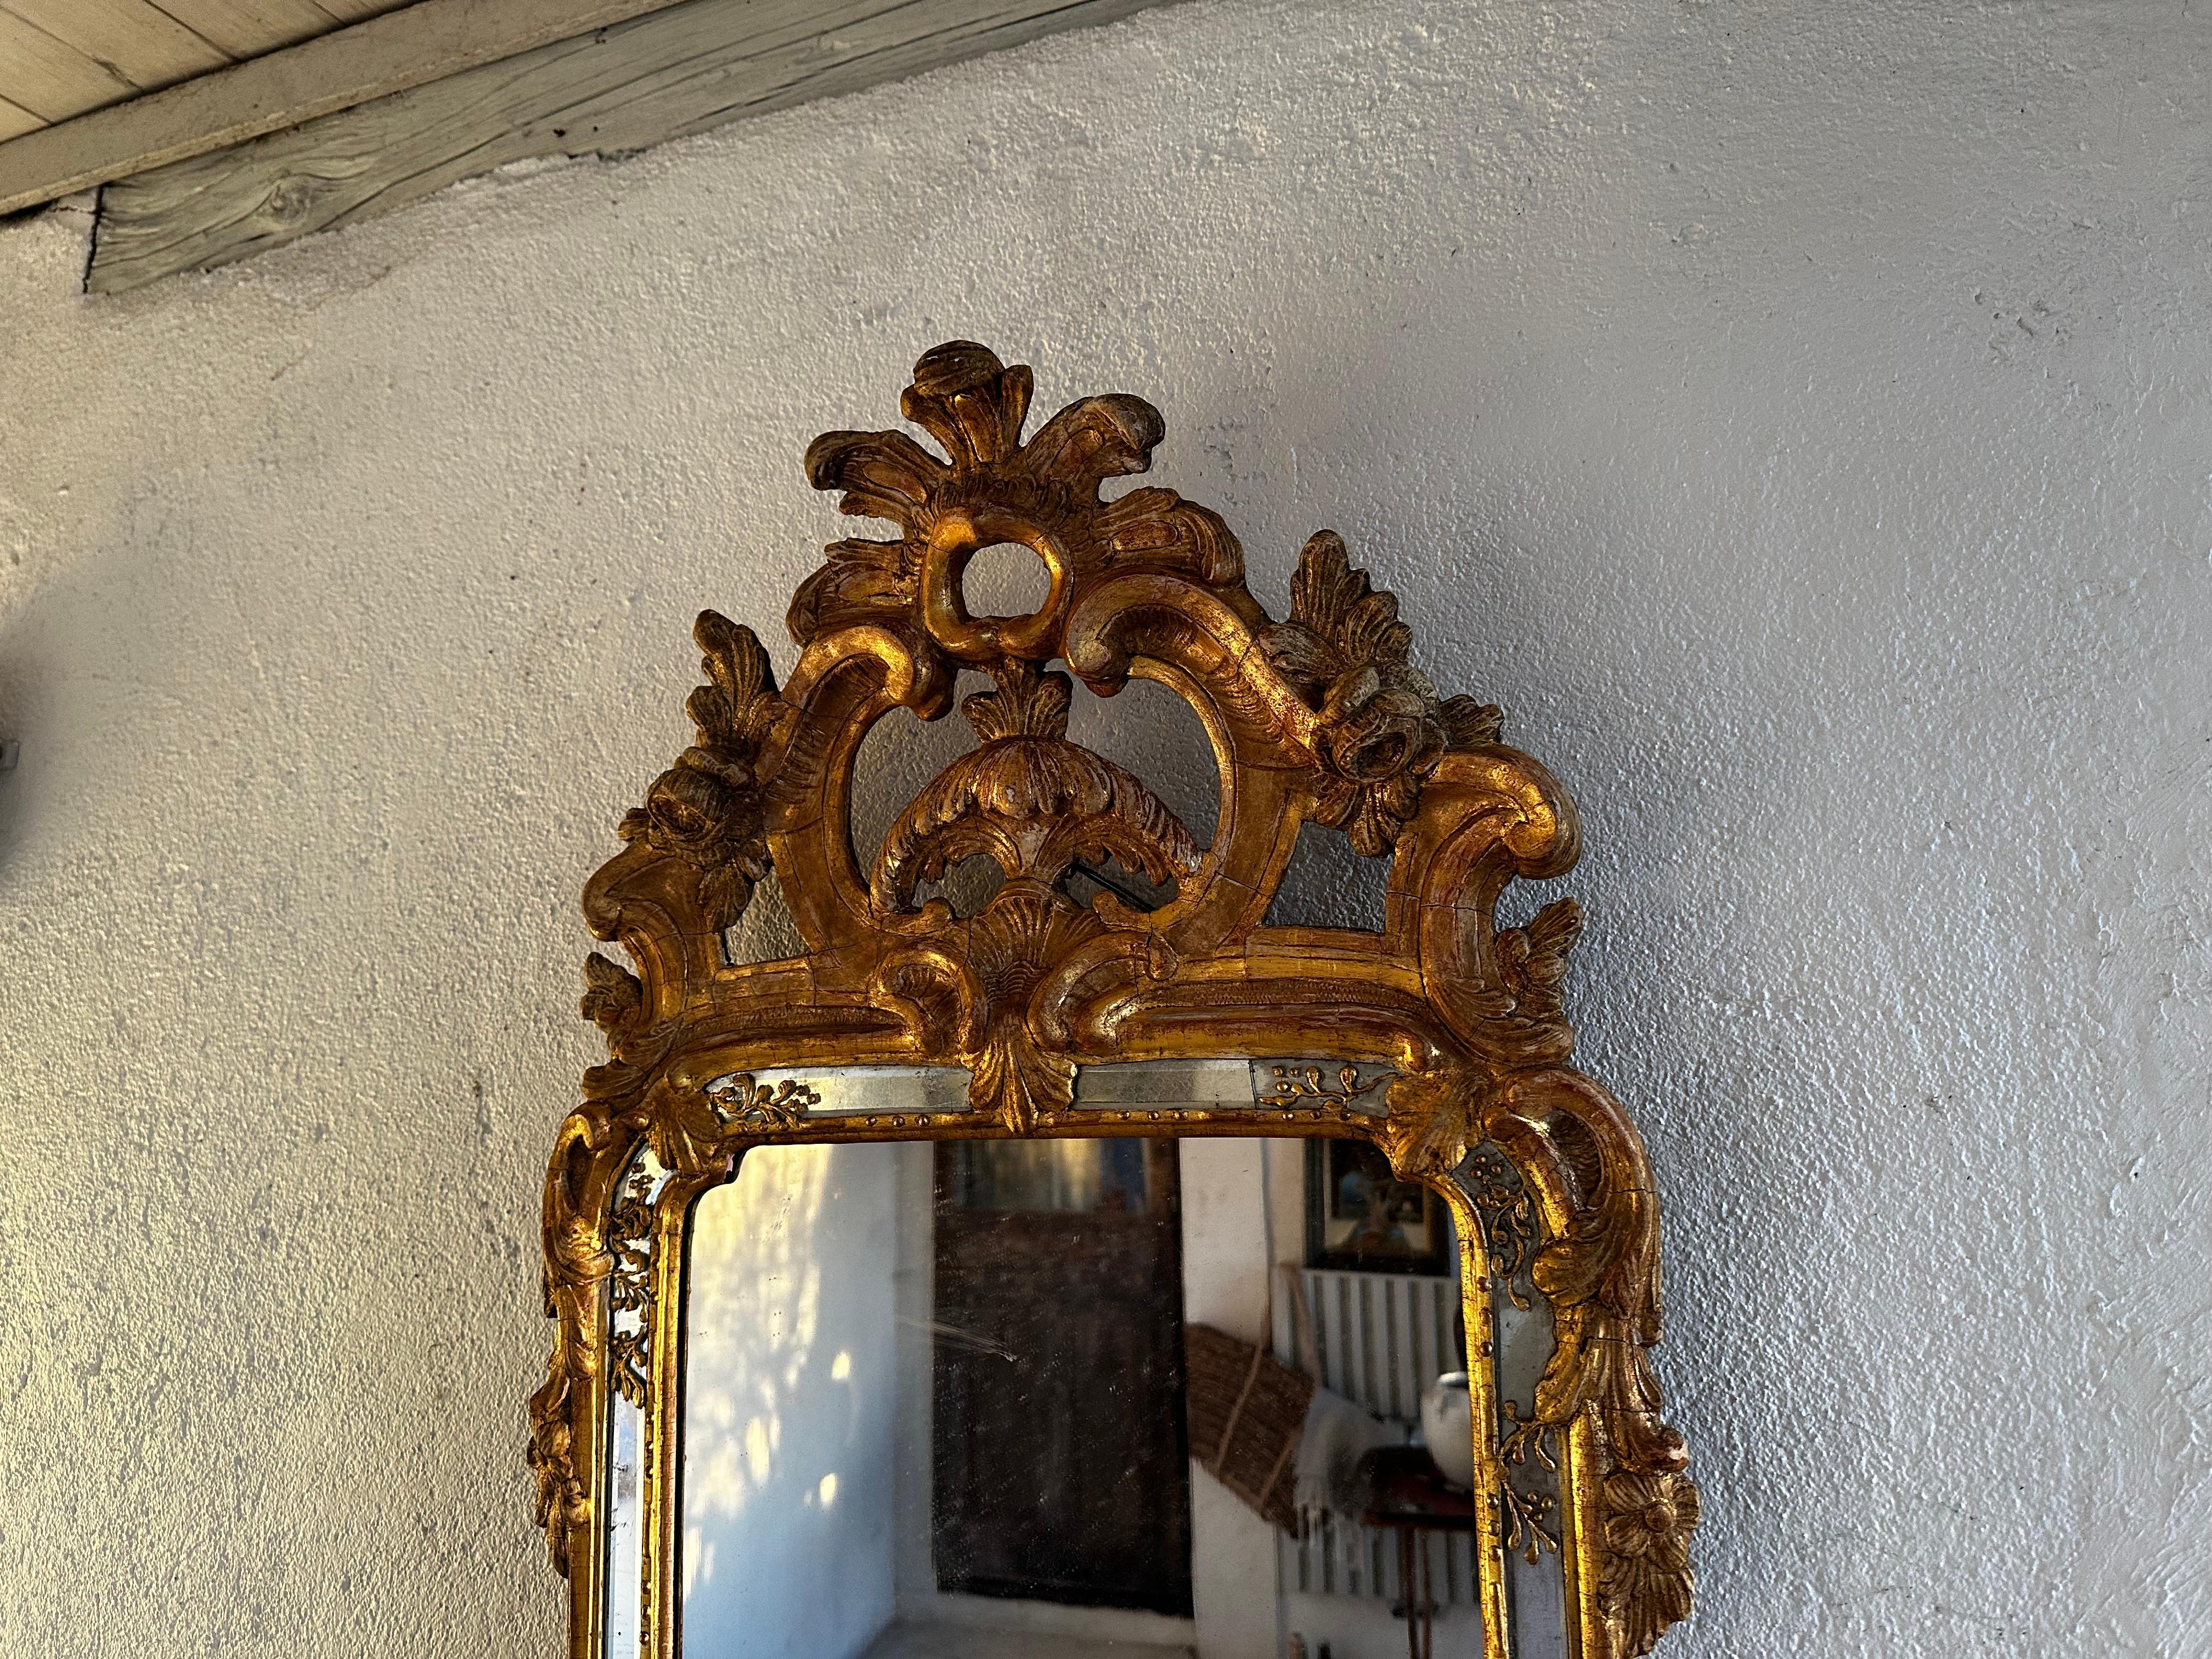 This Rococo mirror is attributed to Niclas Meunier, 1754-97. He worked in Stockholm as Royal maker of mirrors from 1769. Beautiful top with rocaille, volutes and acanthus. The bottom part is also decorated with a rocaille. Fine restoration with much